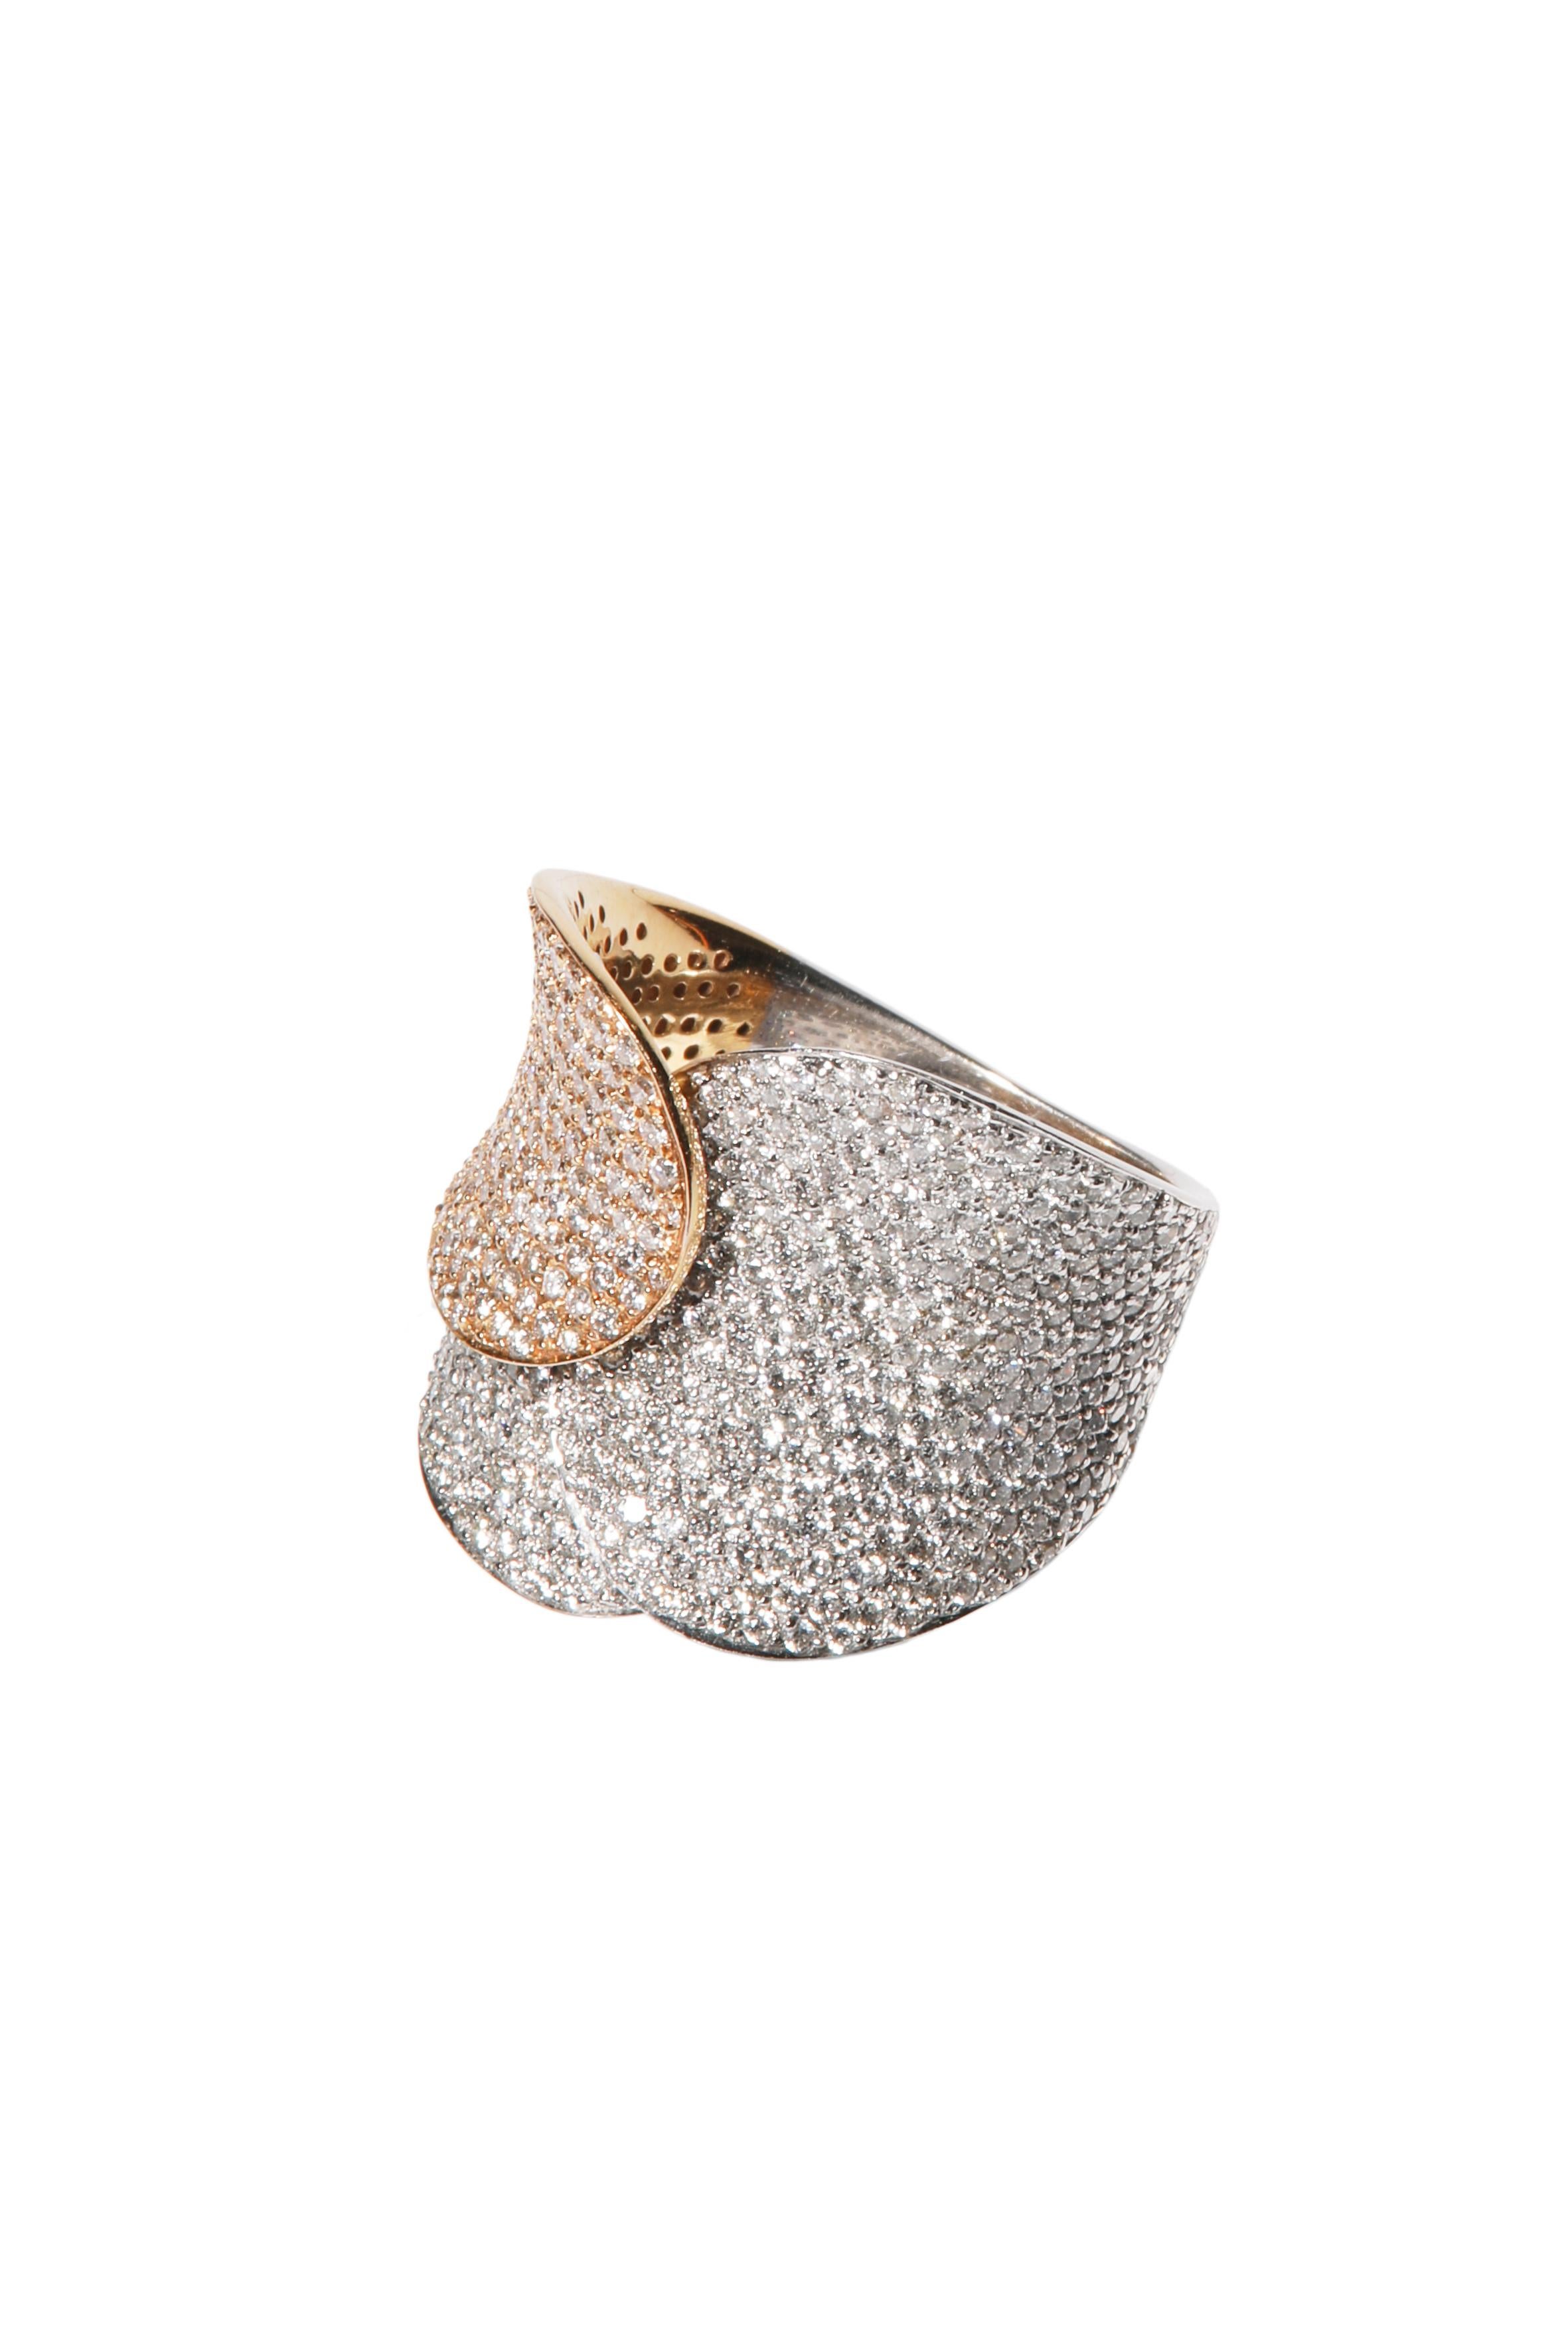 Contemporary 18 Karat White and Pink Gold Ring by Bonebakker Royal Pave Set with Diamonds For Sale